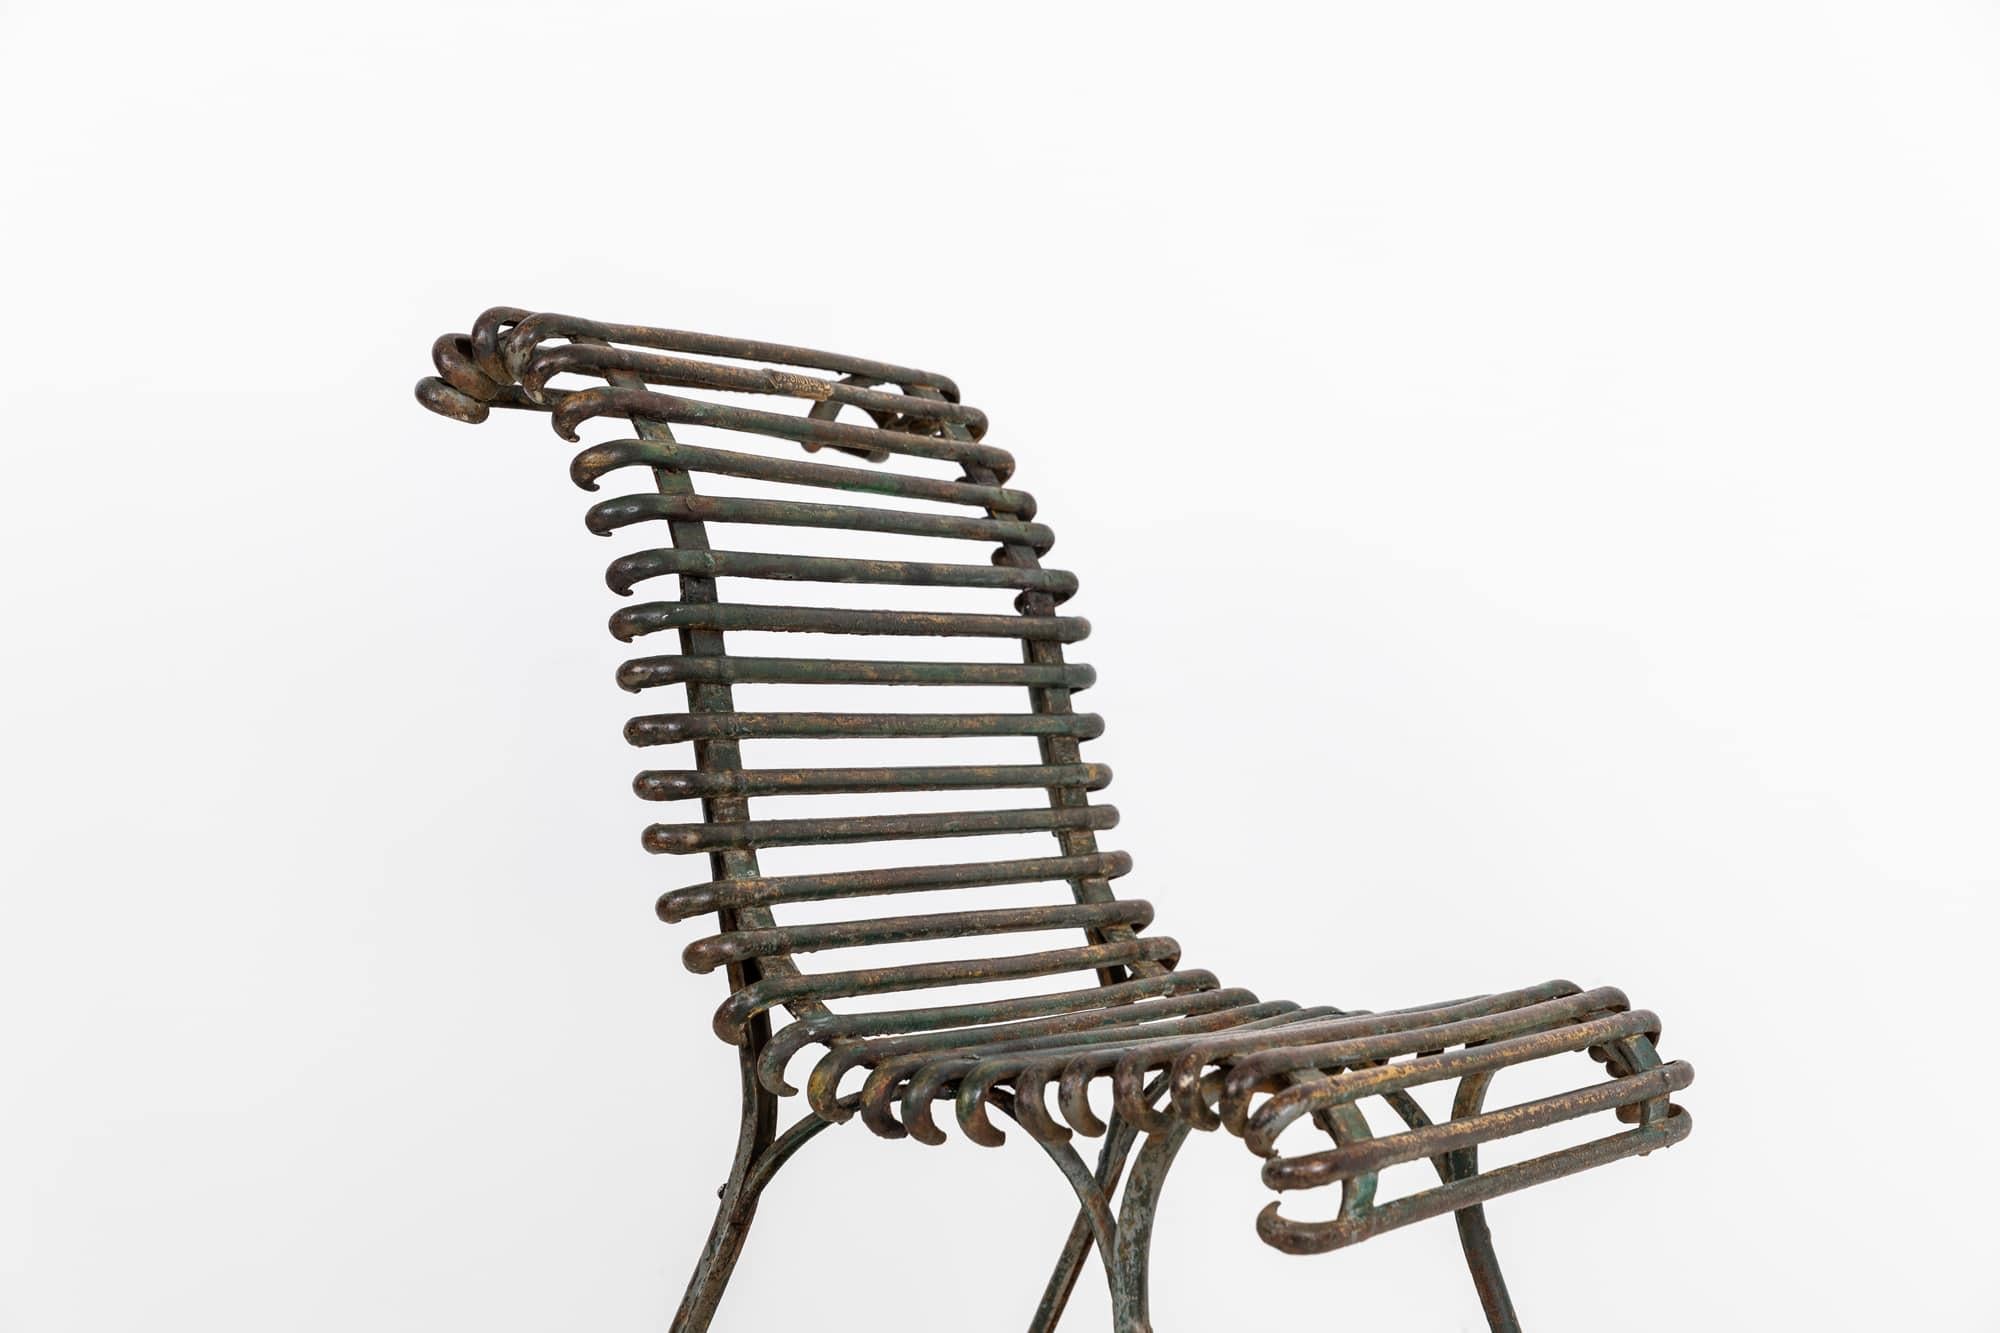 

A beautifully aged wrought iron garden chair from the Arras region in France. c.1900

Presented in original as found condition with a wonderful patina all over and bags of character. Blacksmith made and hand rivetted with pad feet all intact